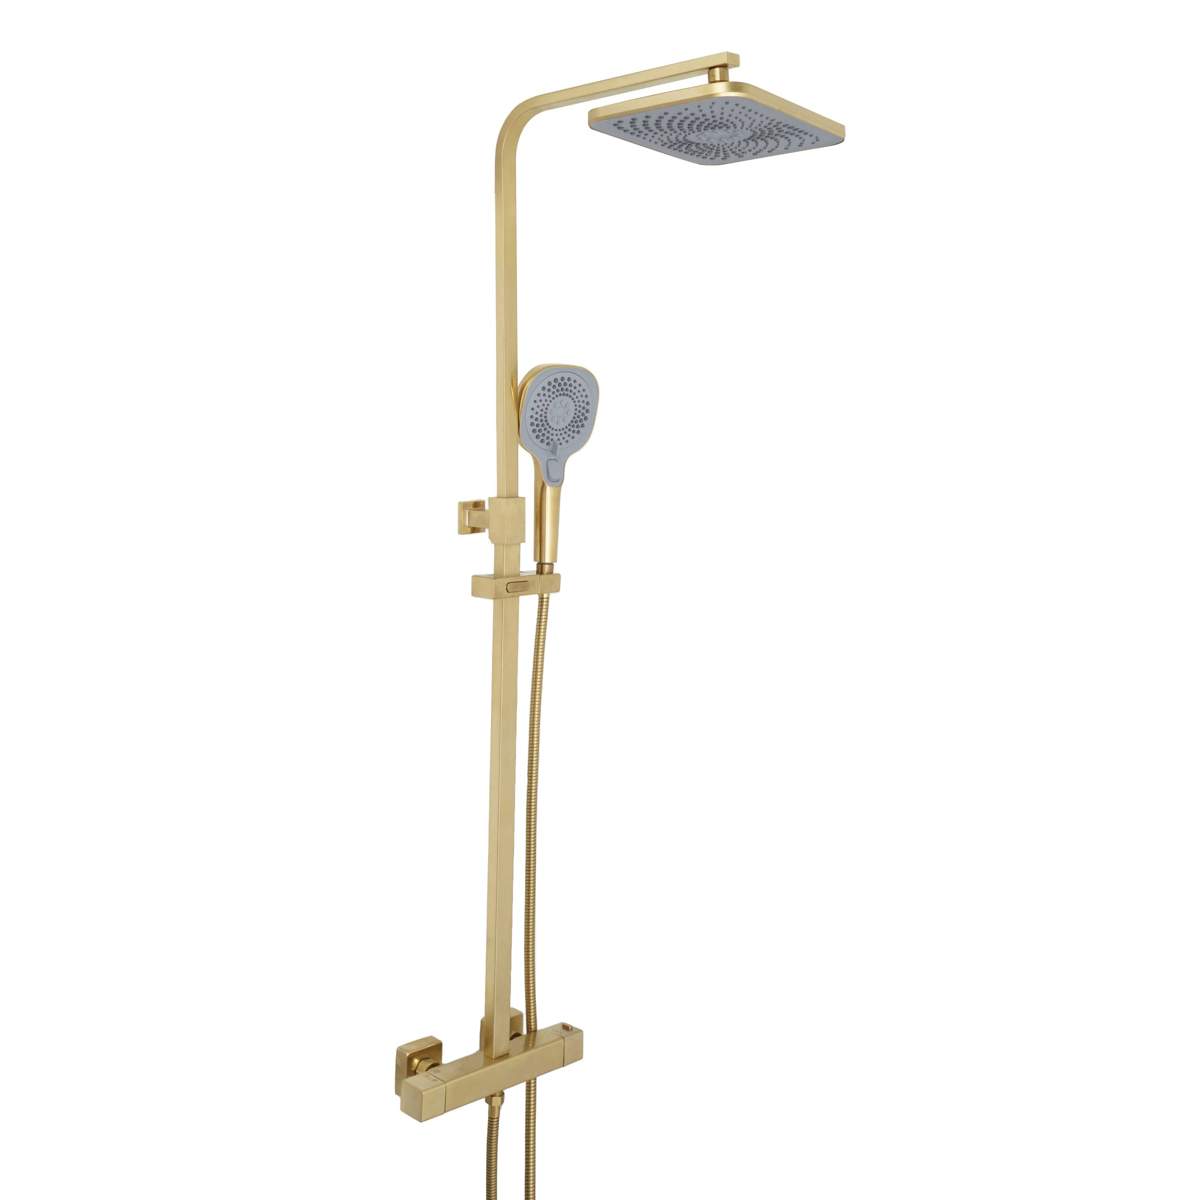 JTP Hix Brushed Brass Thermostatic Bar Valve with 2 Outlets and Multifunction Shower Handle (33819BBR)